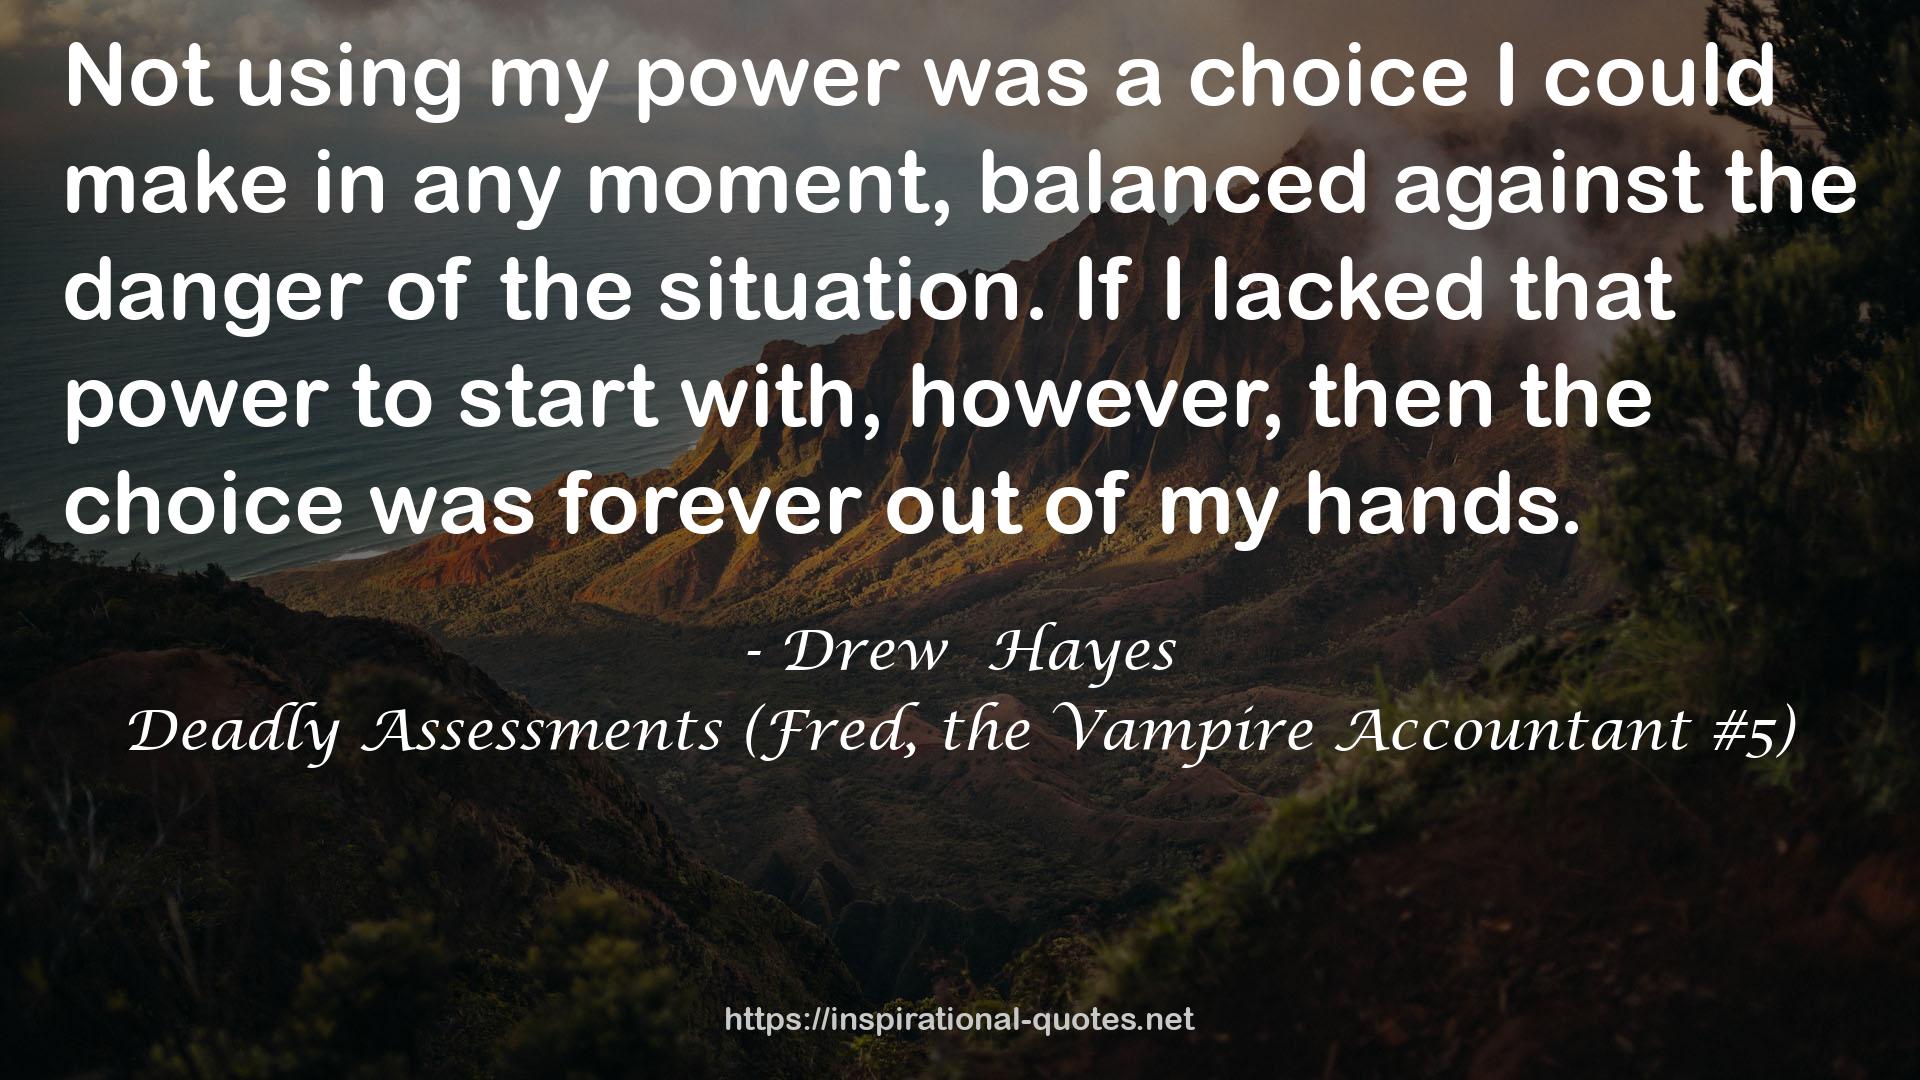 Deadly Assessments (Fred, the Vampire Accountant #5) QUOTES